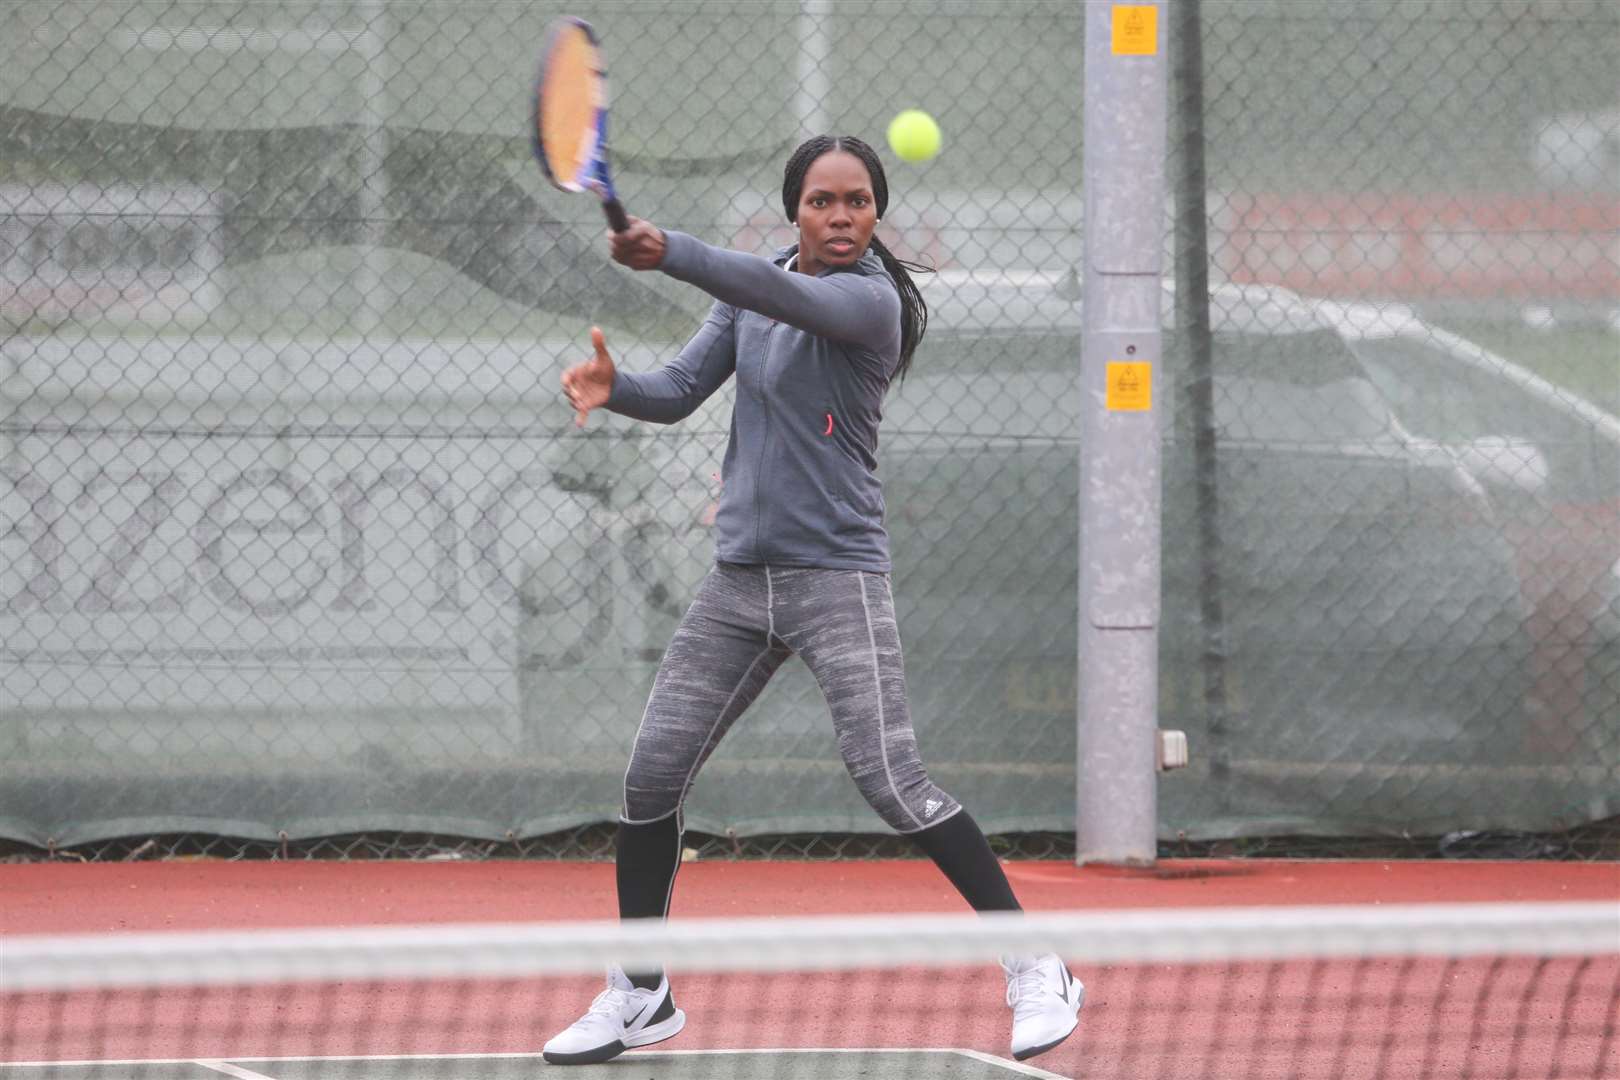 Club member and committee member Izzy Eustache pictured playing at Gravesham Tennis Club earlier this month. Picture: Rob Powell